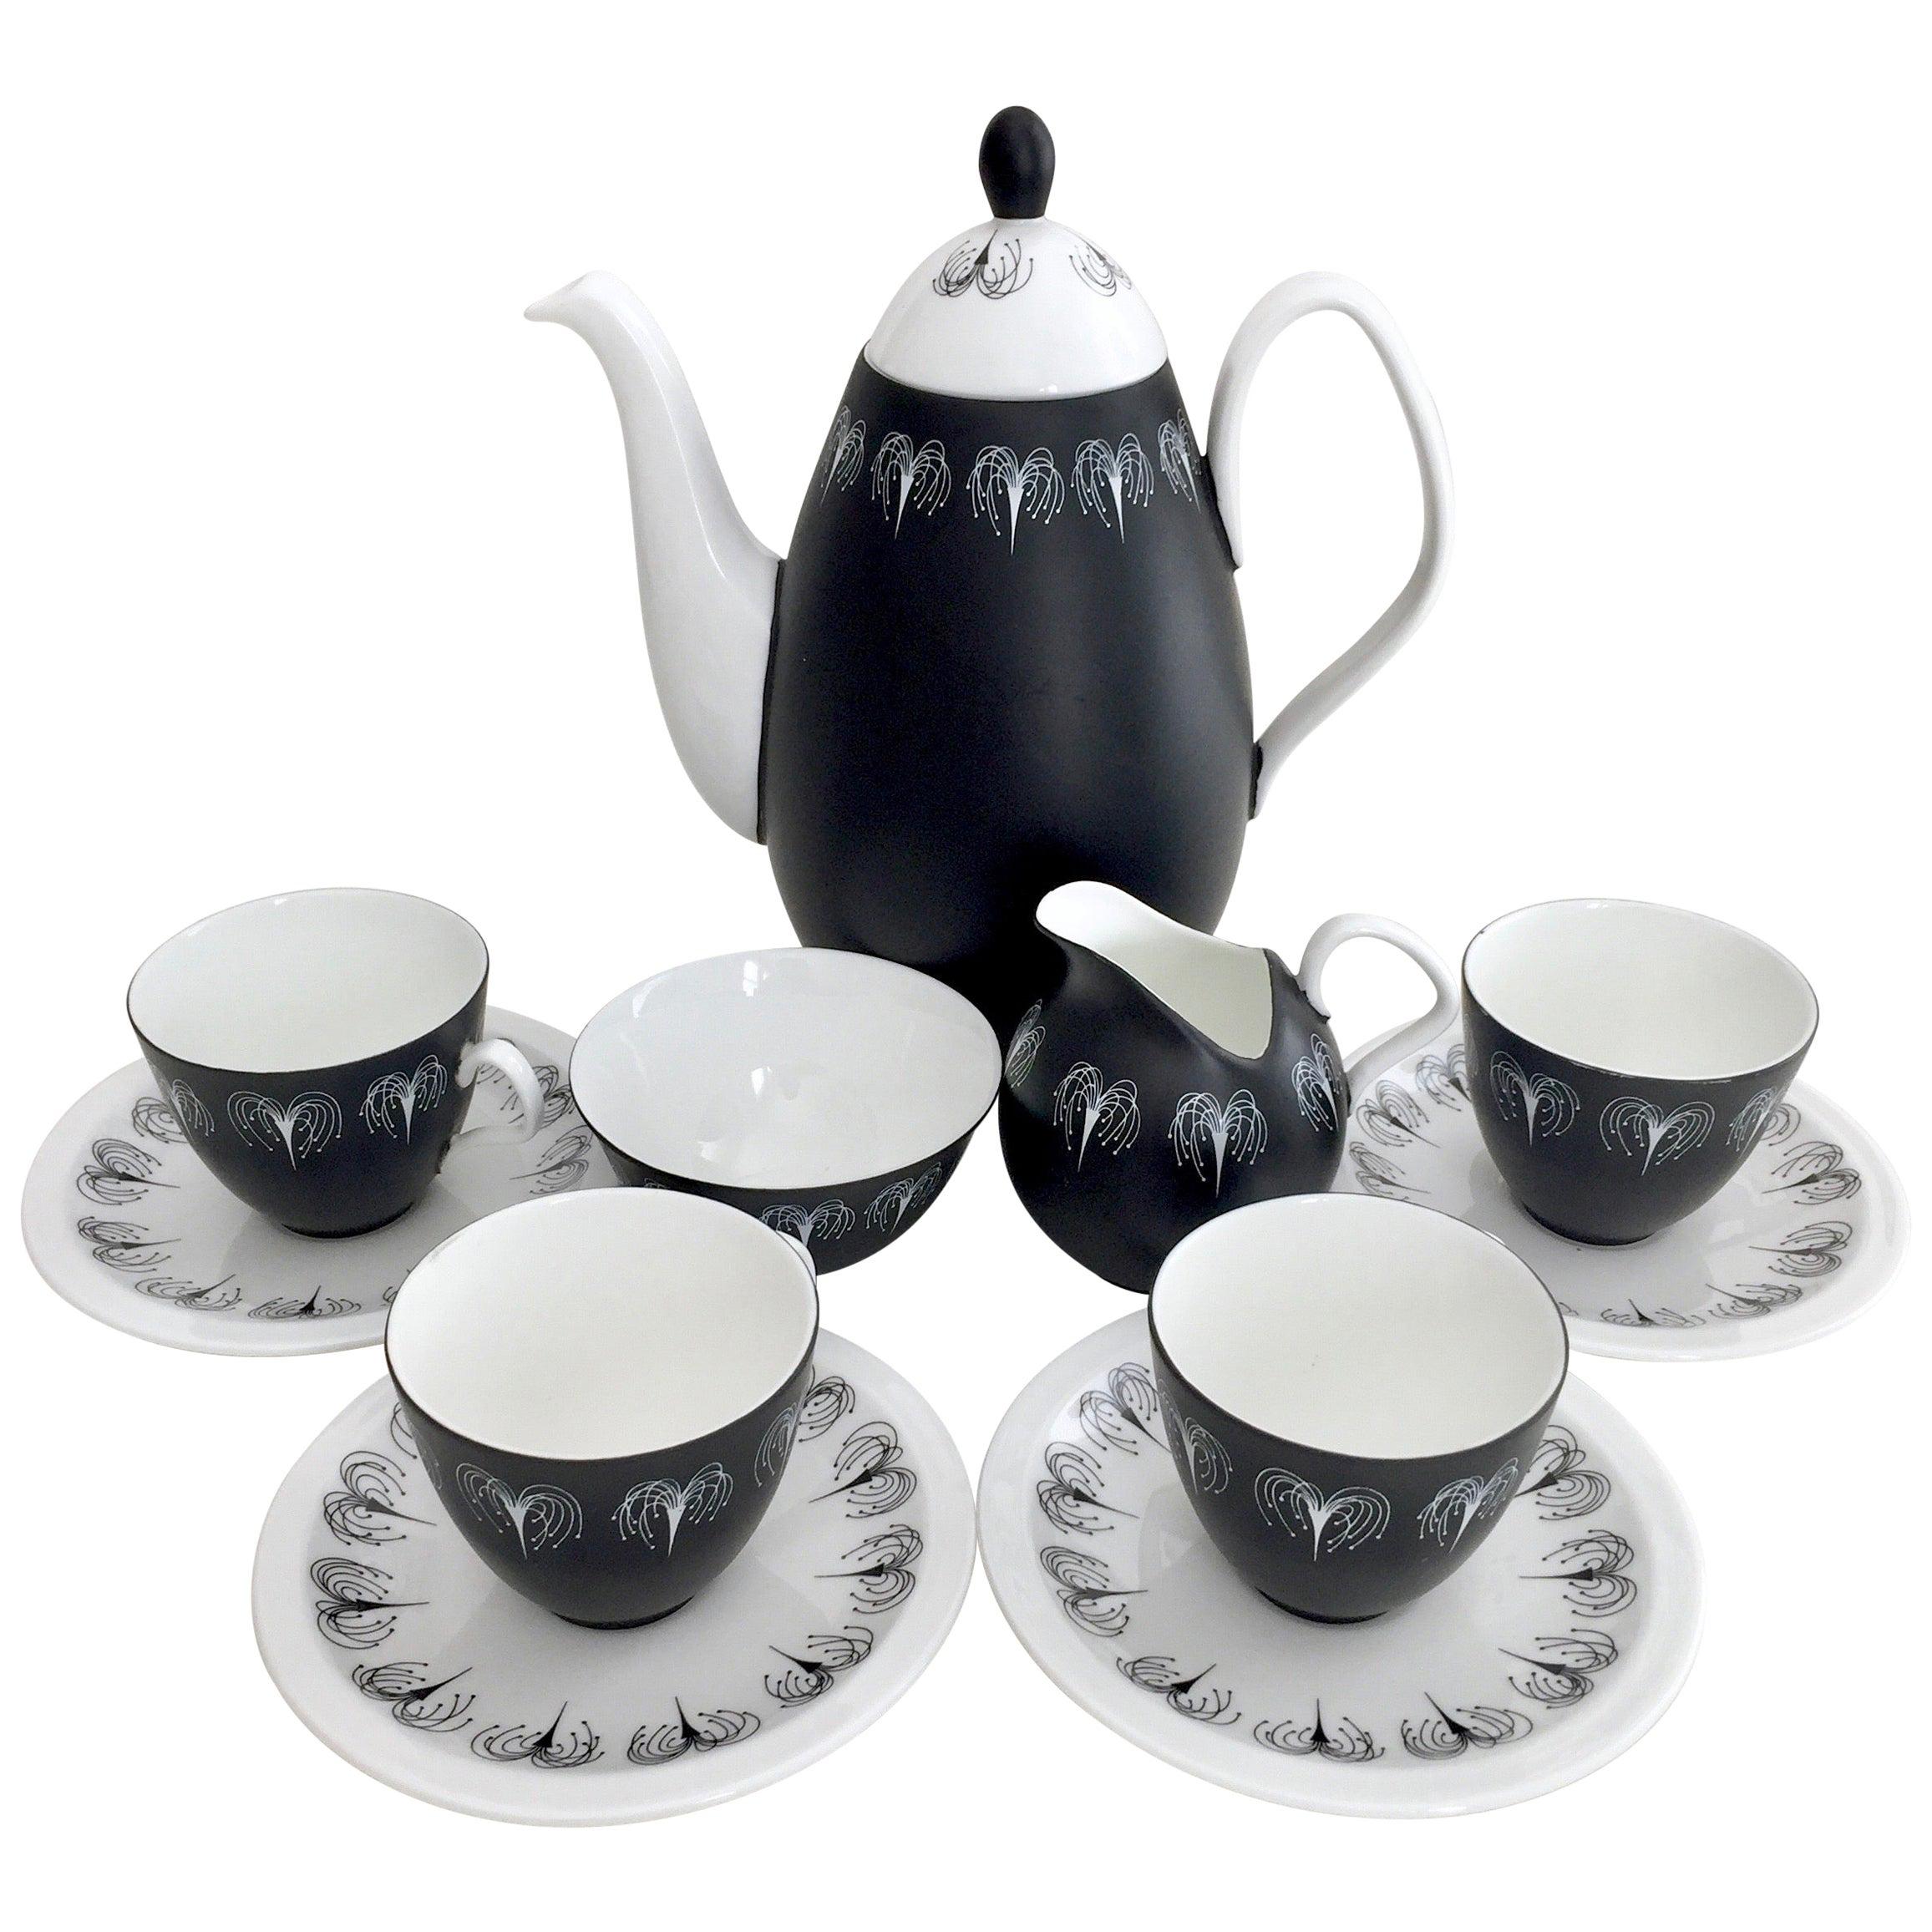 Foley Porcelain Coffee Service, Black and White Domino Midcentury Modern ca 1960